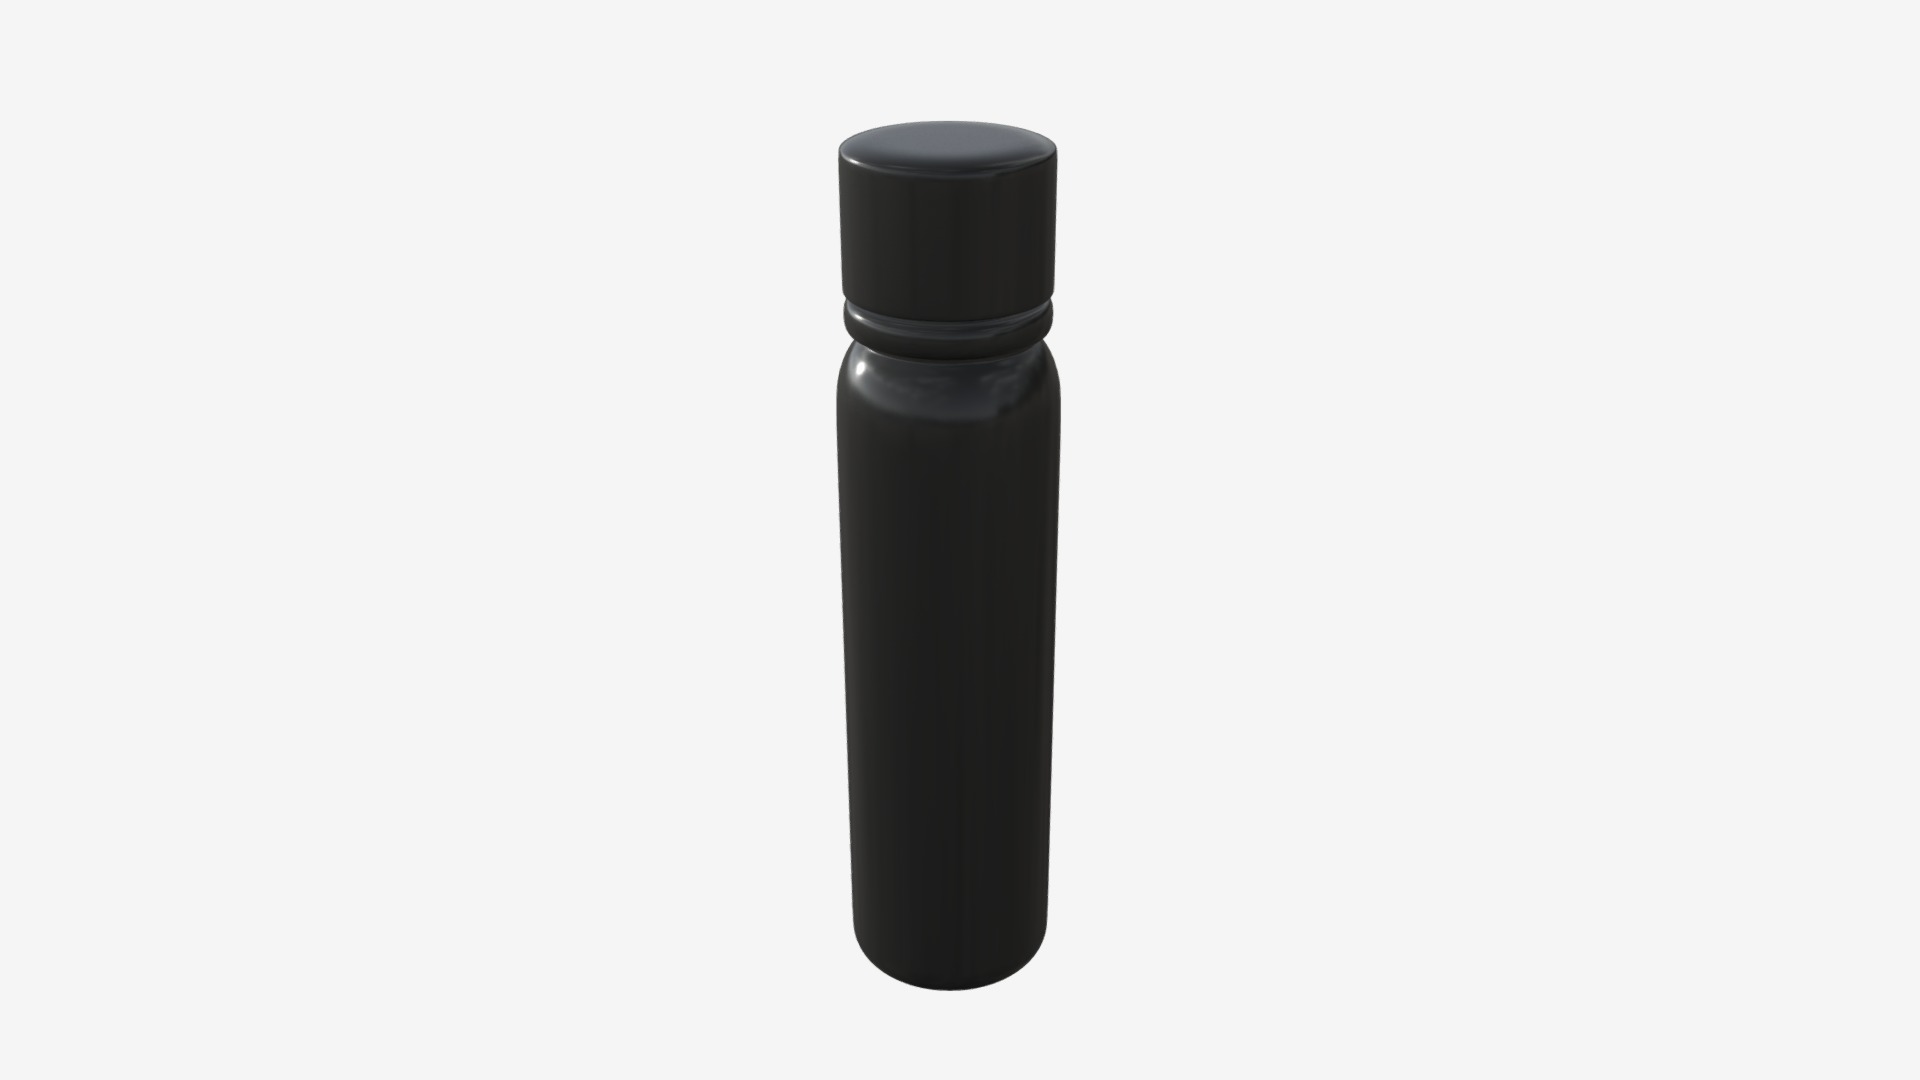 3D model nutrition container 03 - This is a 3D model of the nutrition container 03. The 3D model is about a black cylindrical object.